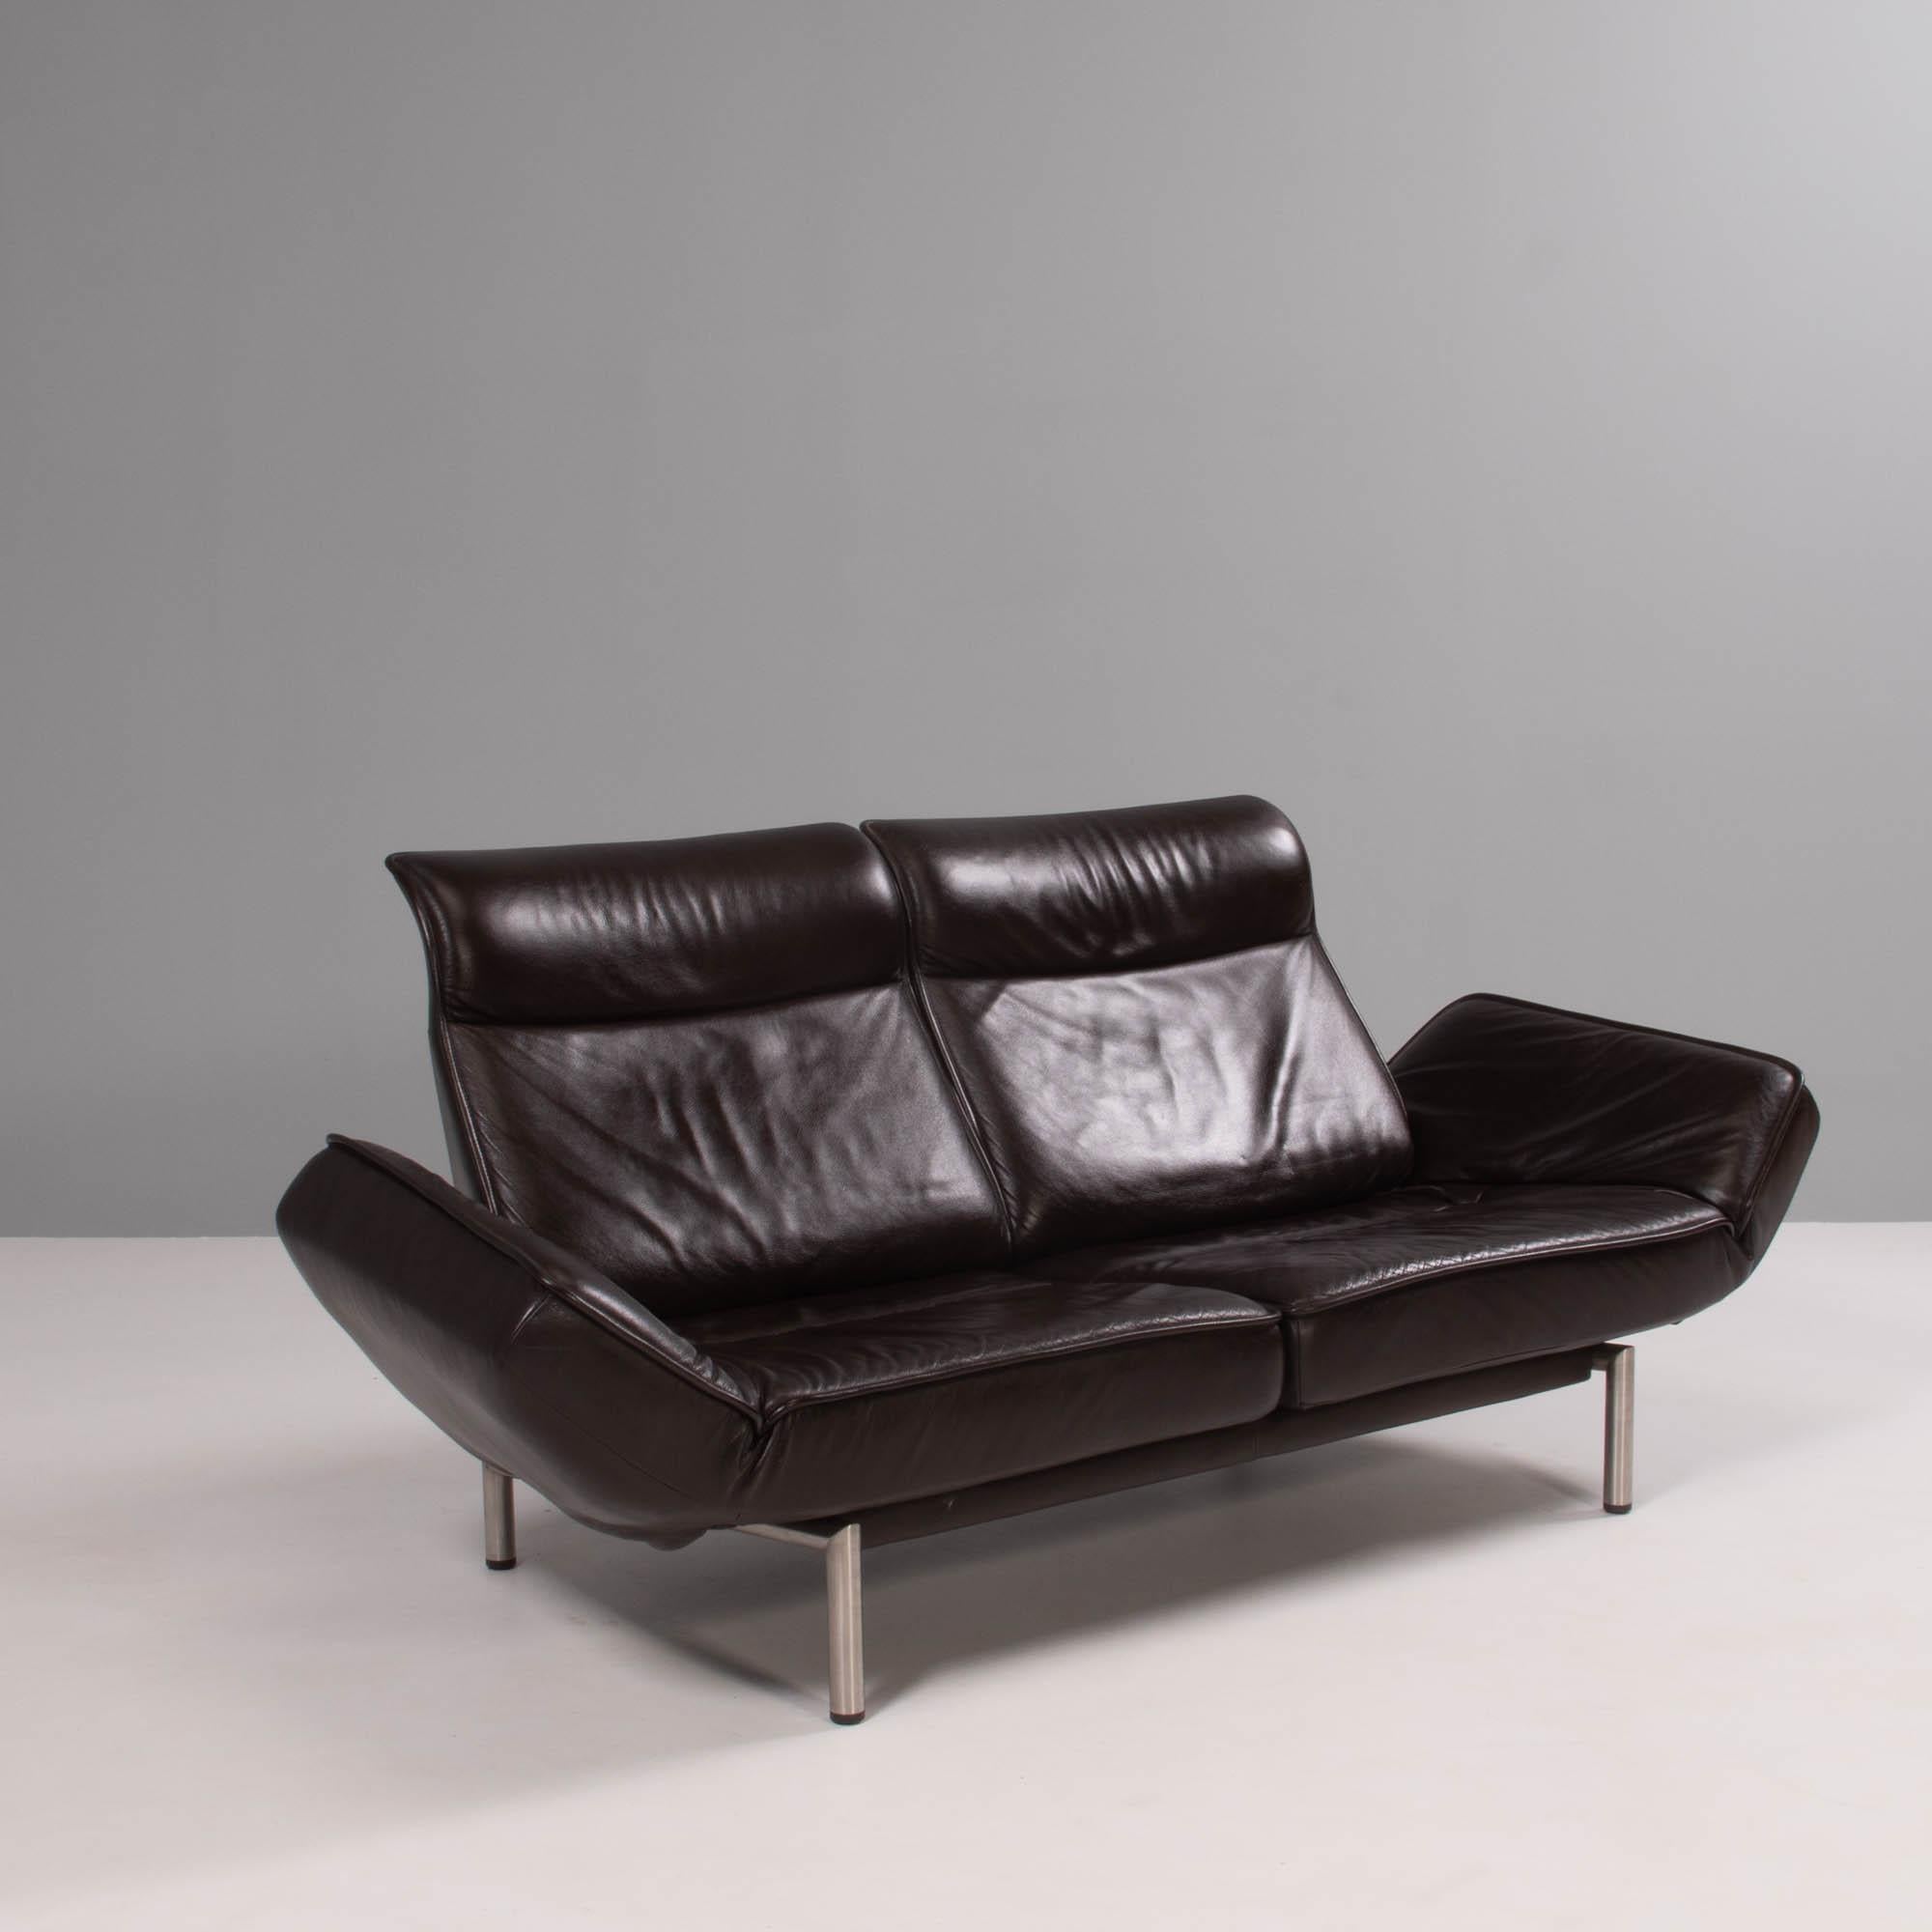 Originally designed by Reto Figg in 1985 the DS-450 has since been updated by Thomas Althaus. 

Constructed with chrome base and upholstered in dark brown leather, the sofa can be adapted into a variety of different seating arrangements.

The